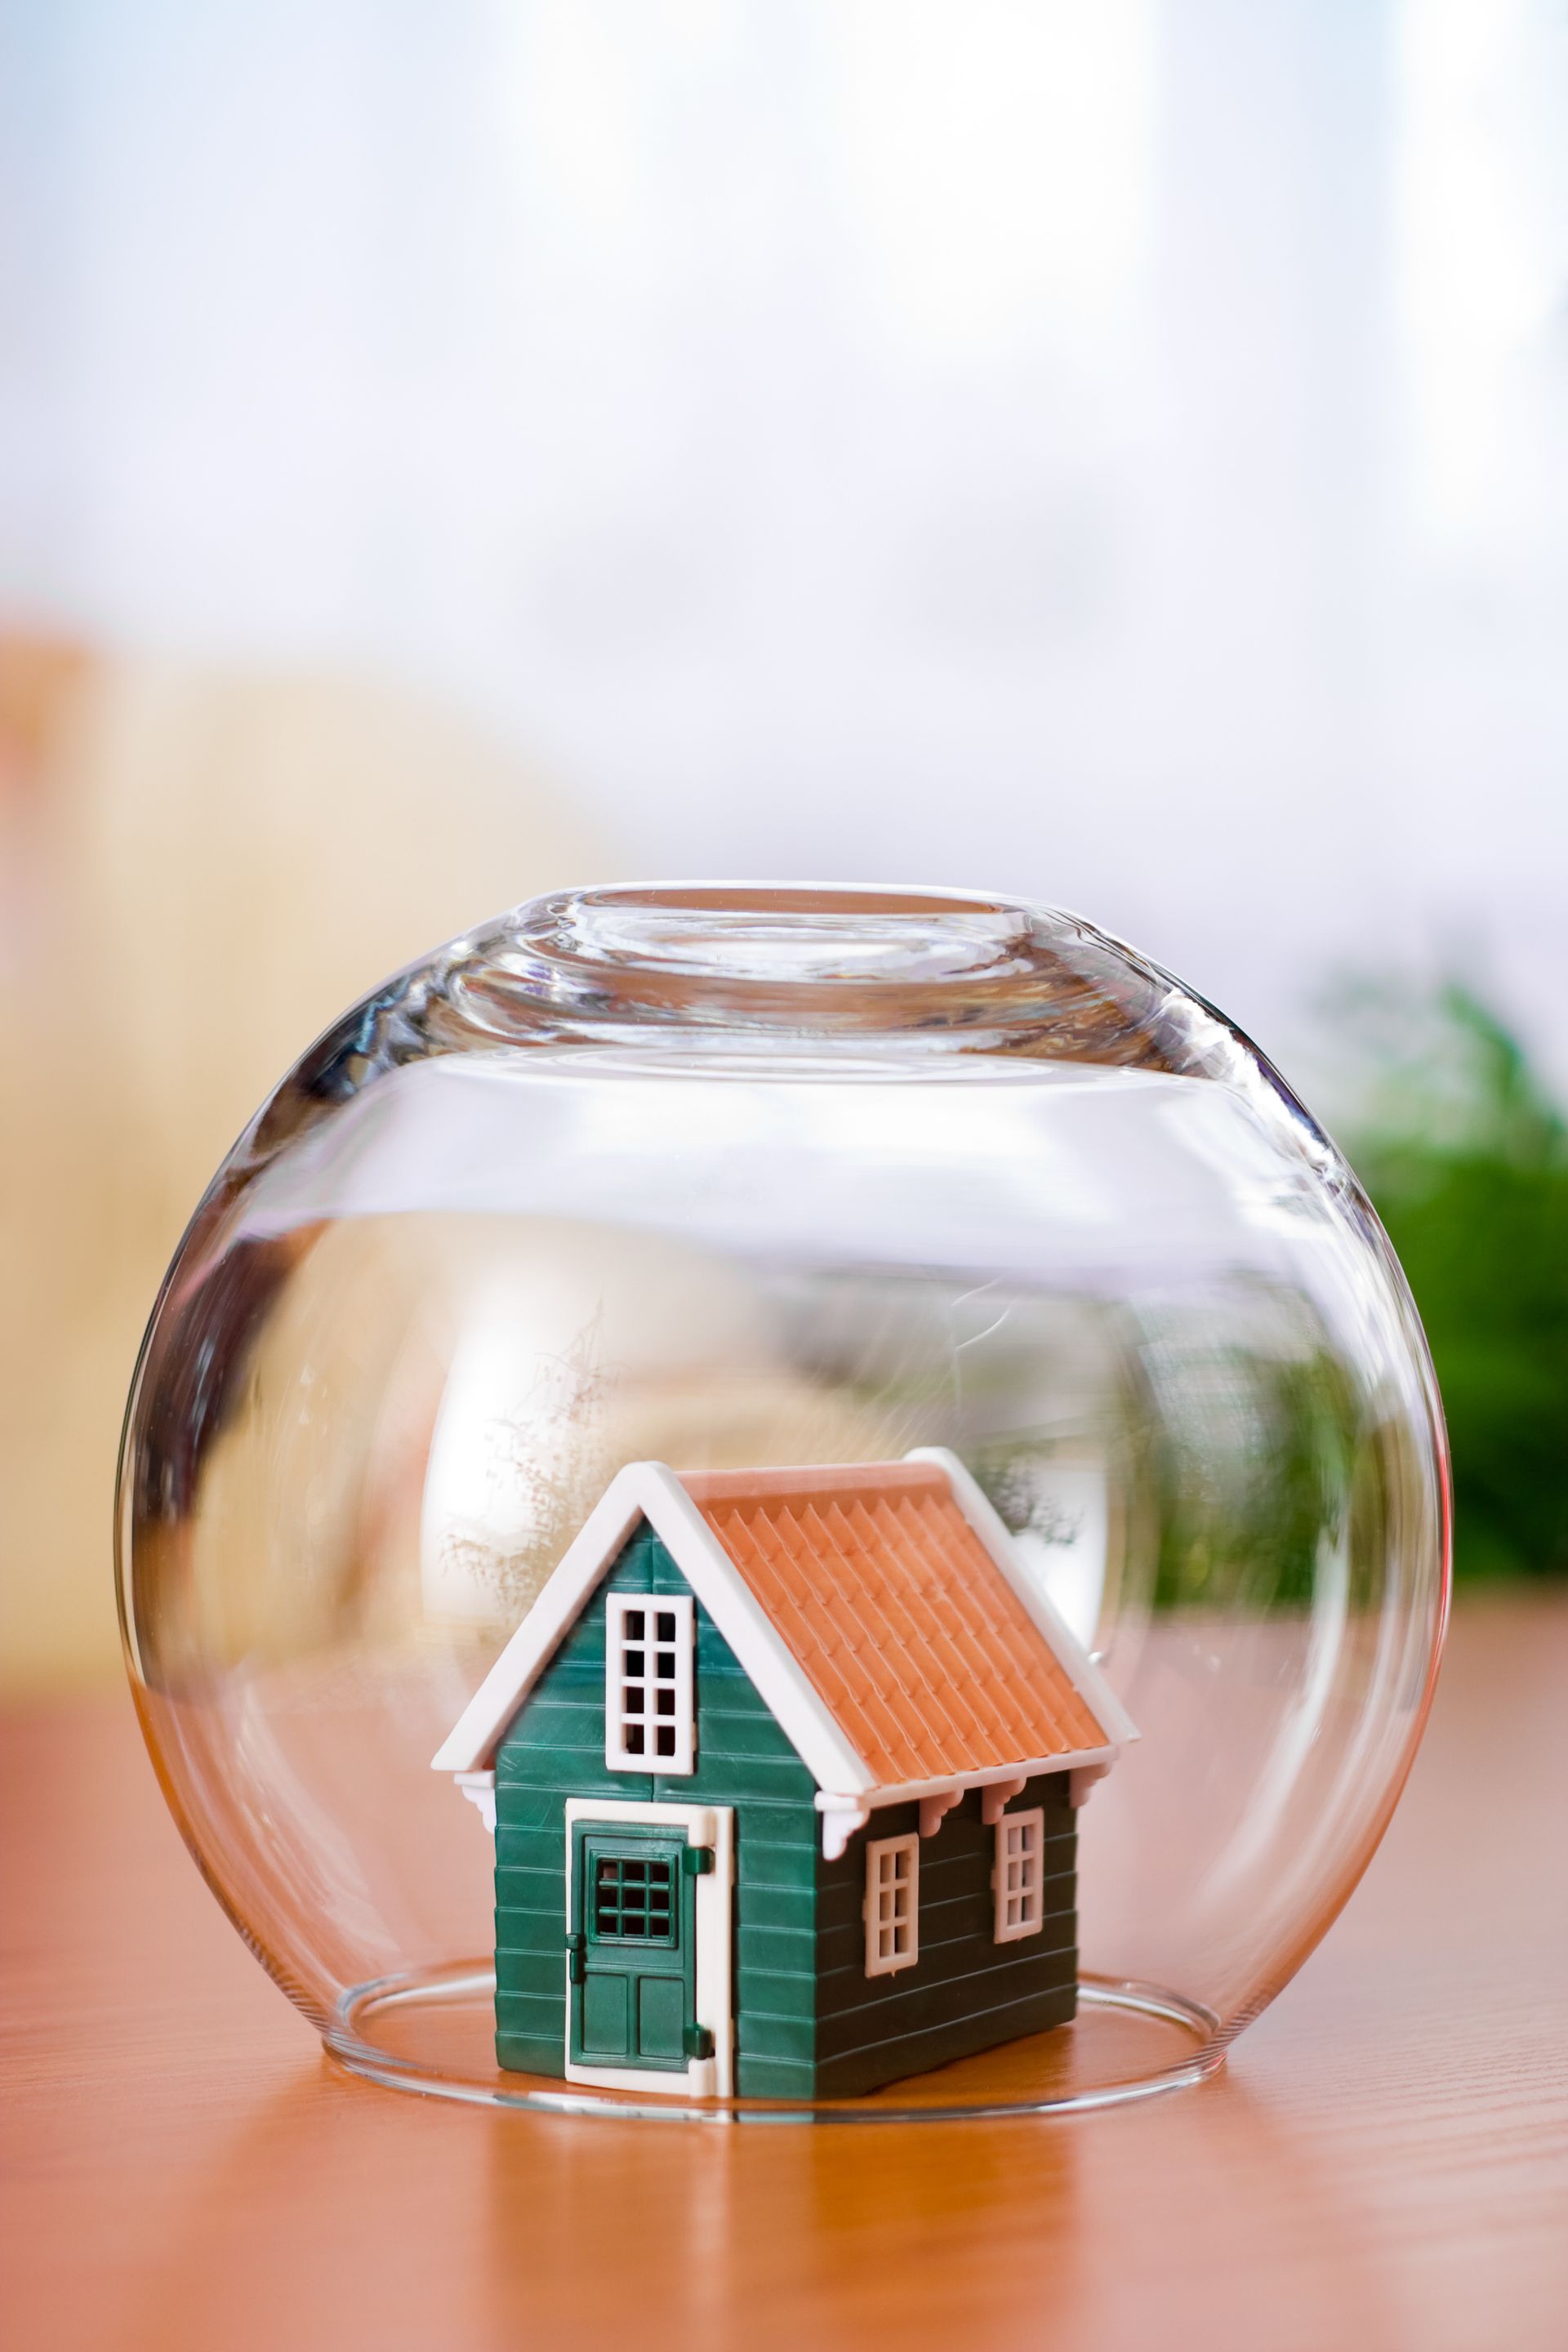 House in glass bubble